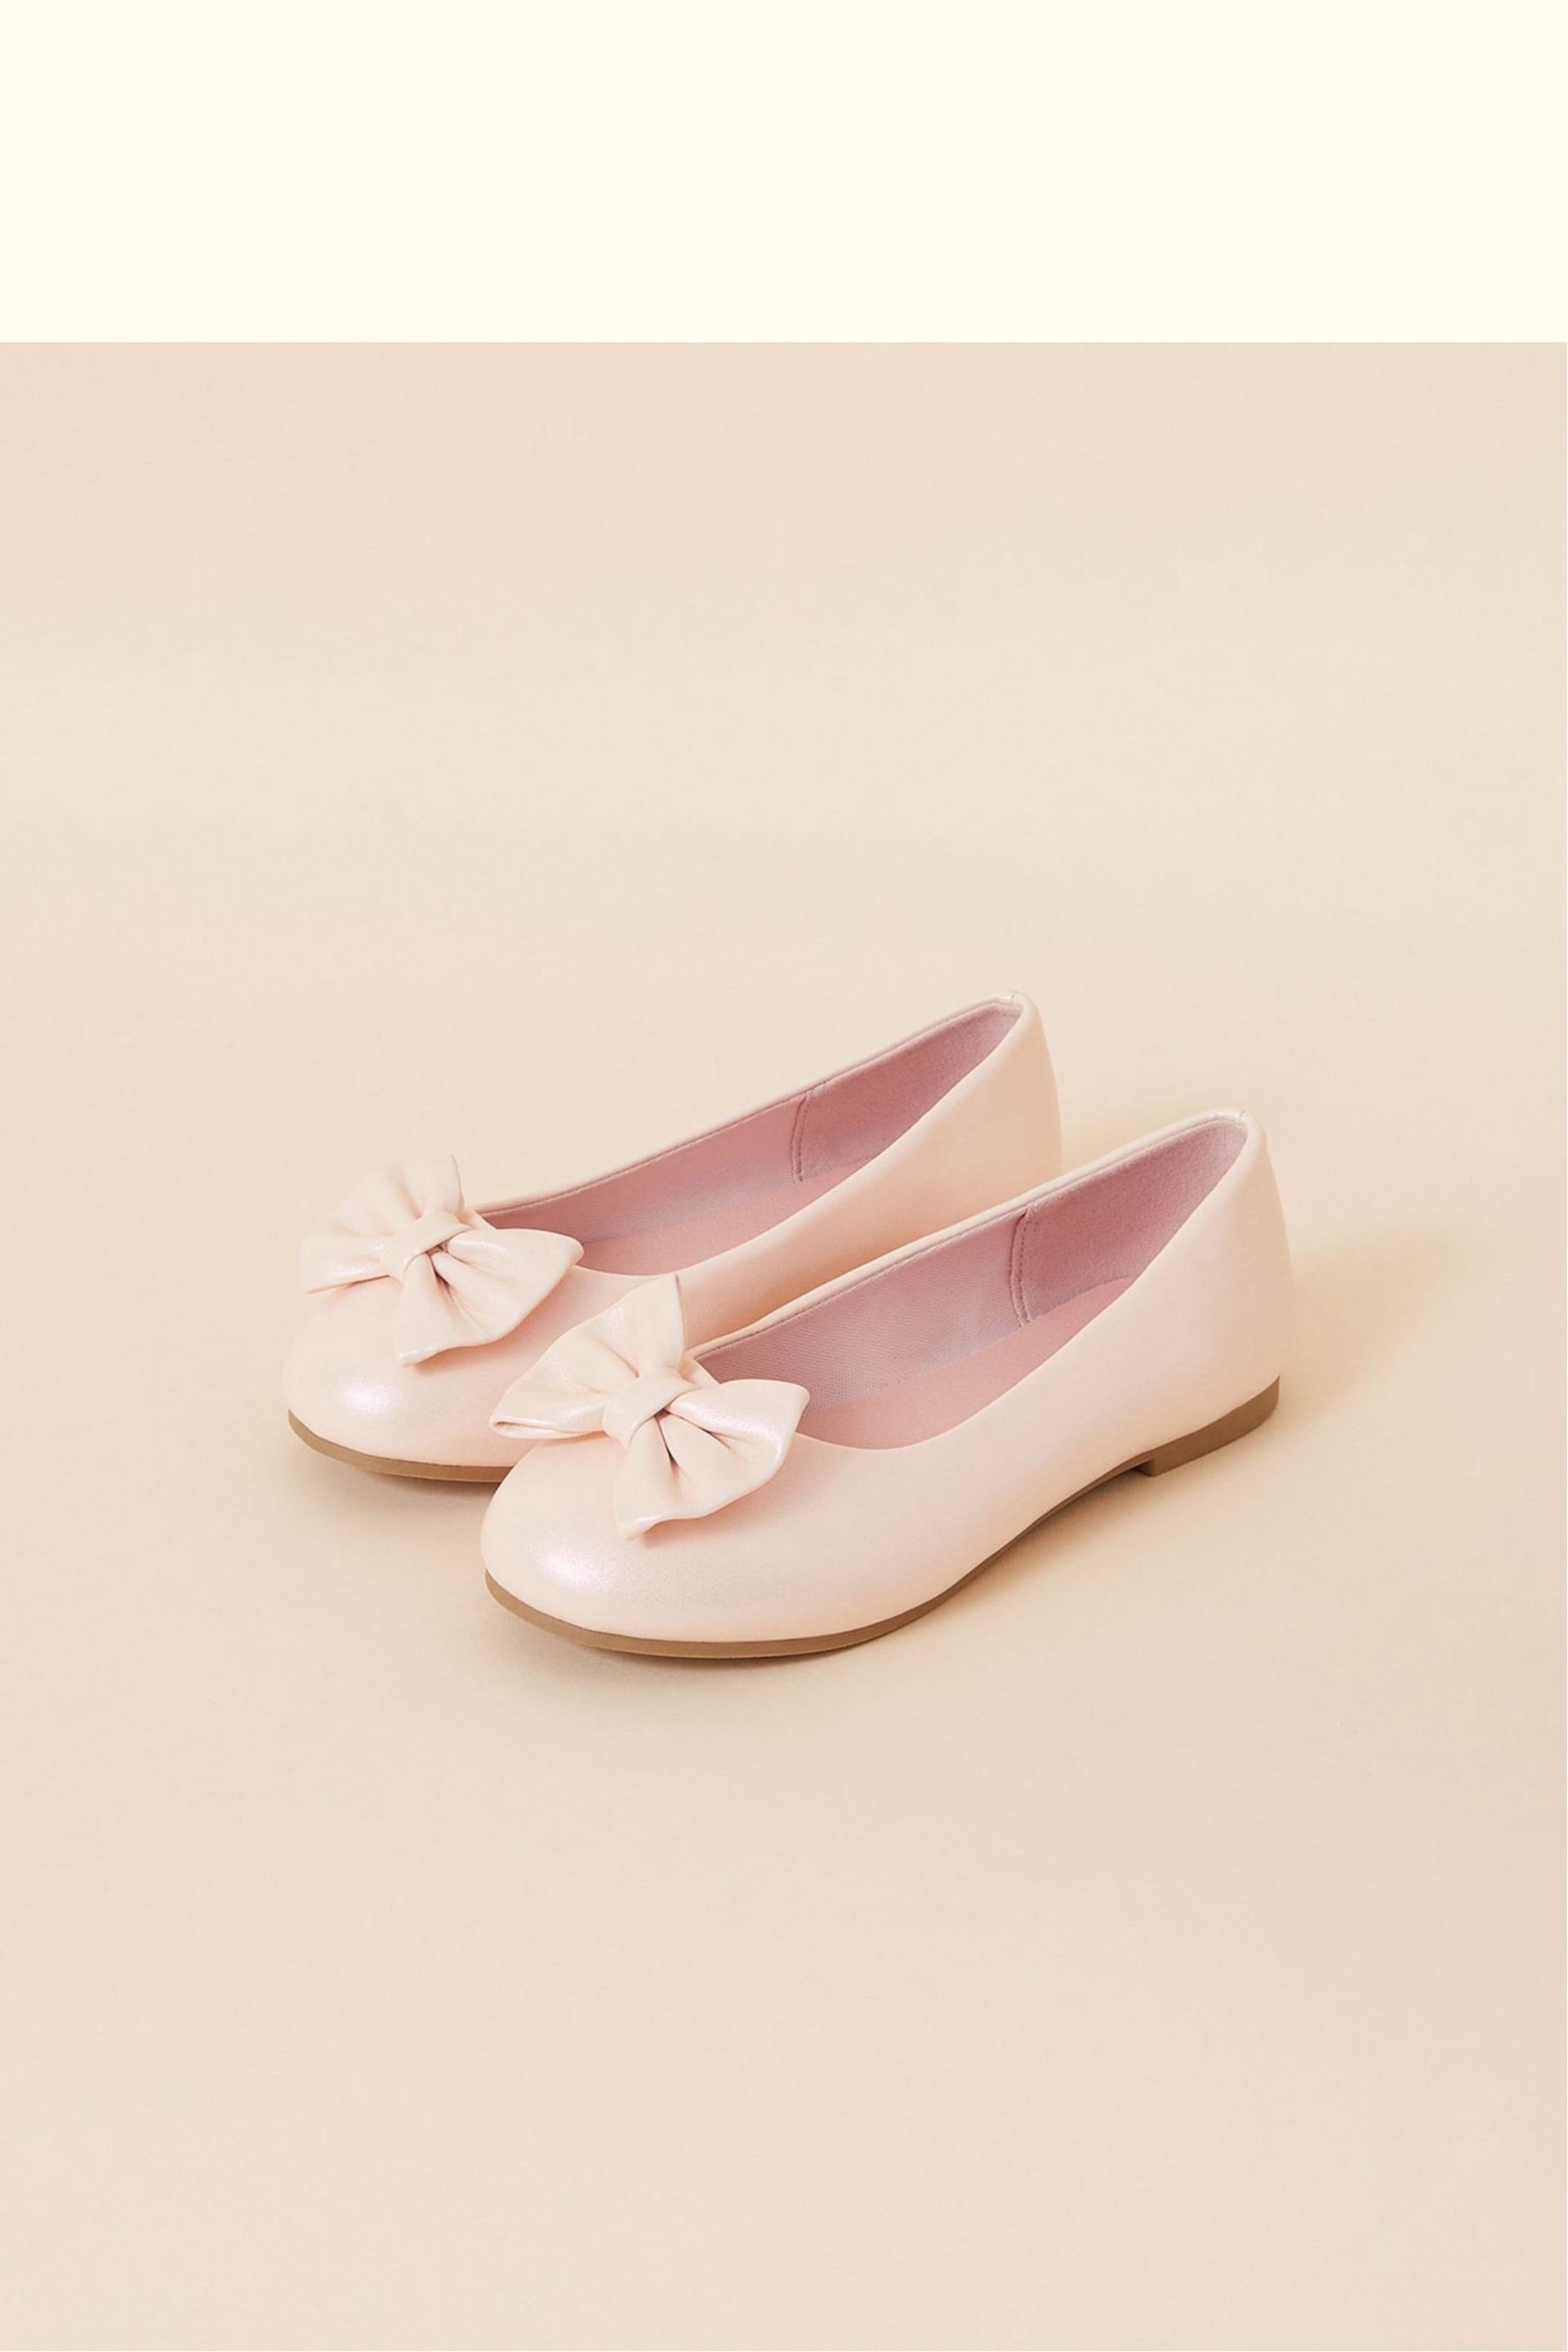 Angels by Accessorize Girls Pink Bow Ballerina Flat Shoes - Image 1 of 2